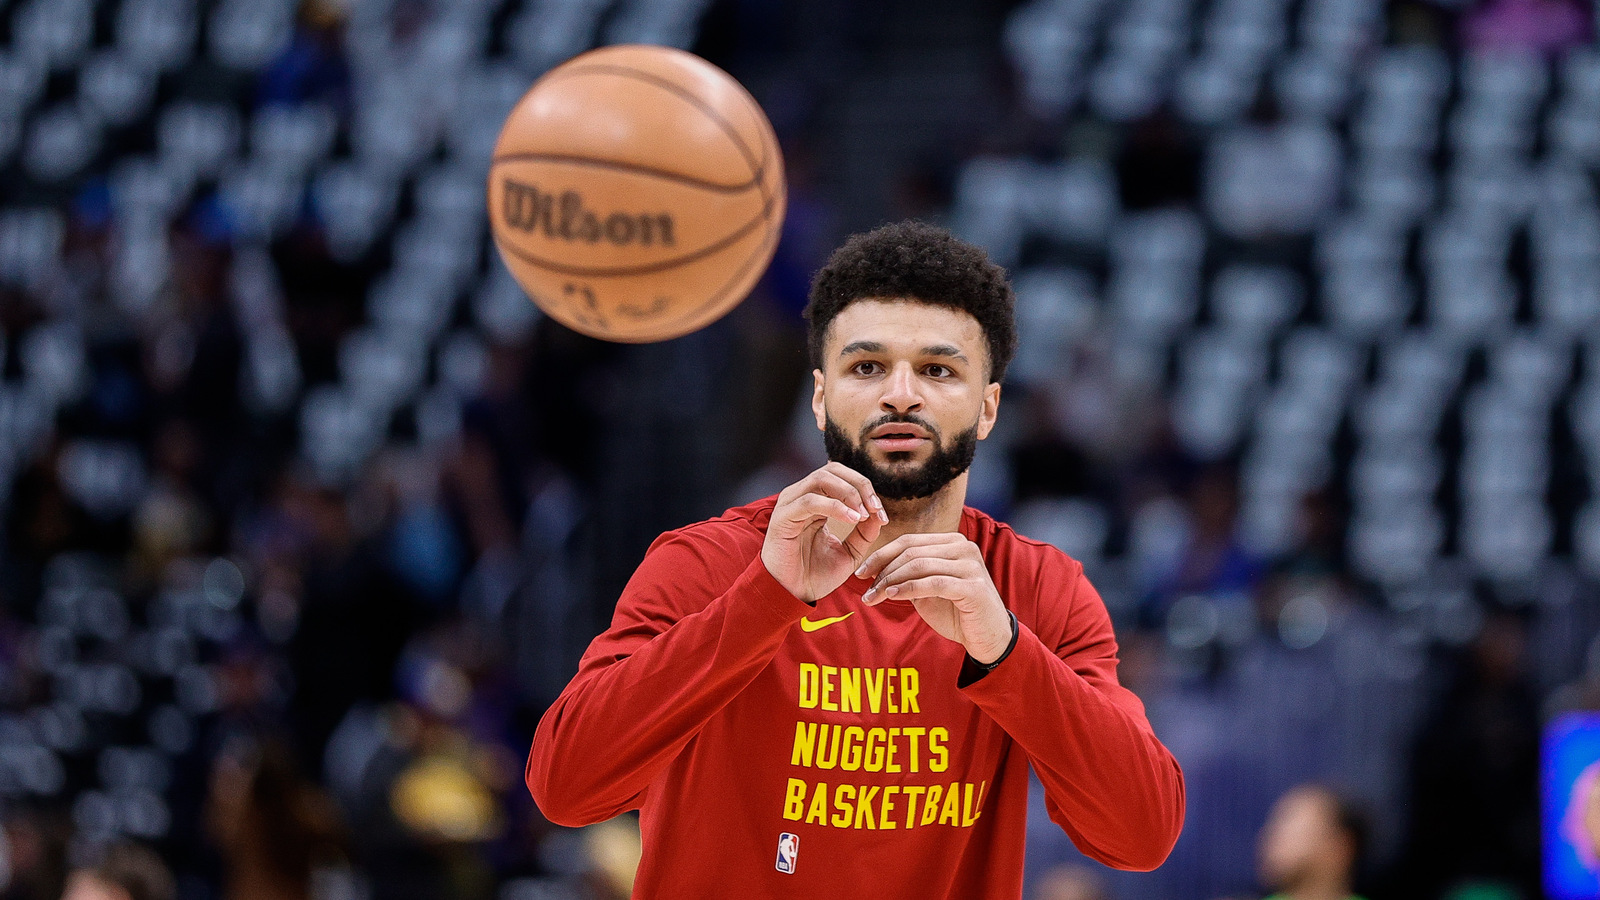 Should Denver Nuggets’ Jamal Murray Be Suspended For Dangerous Game 2 Action? Draymond Green Speaks Out